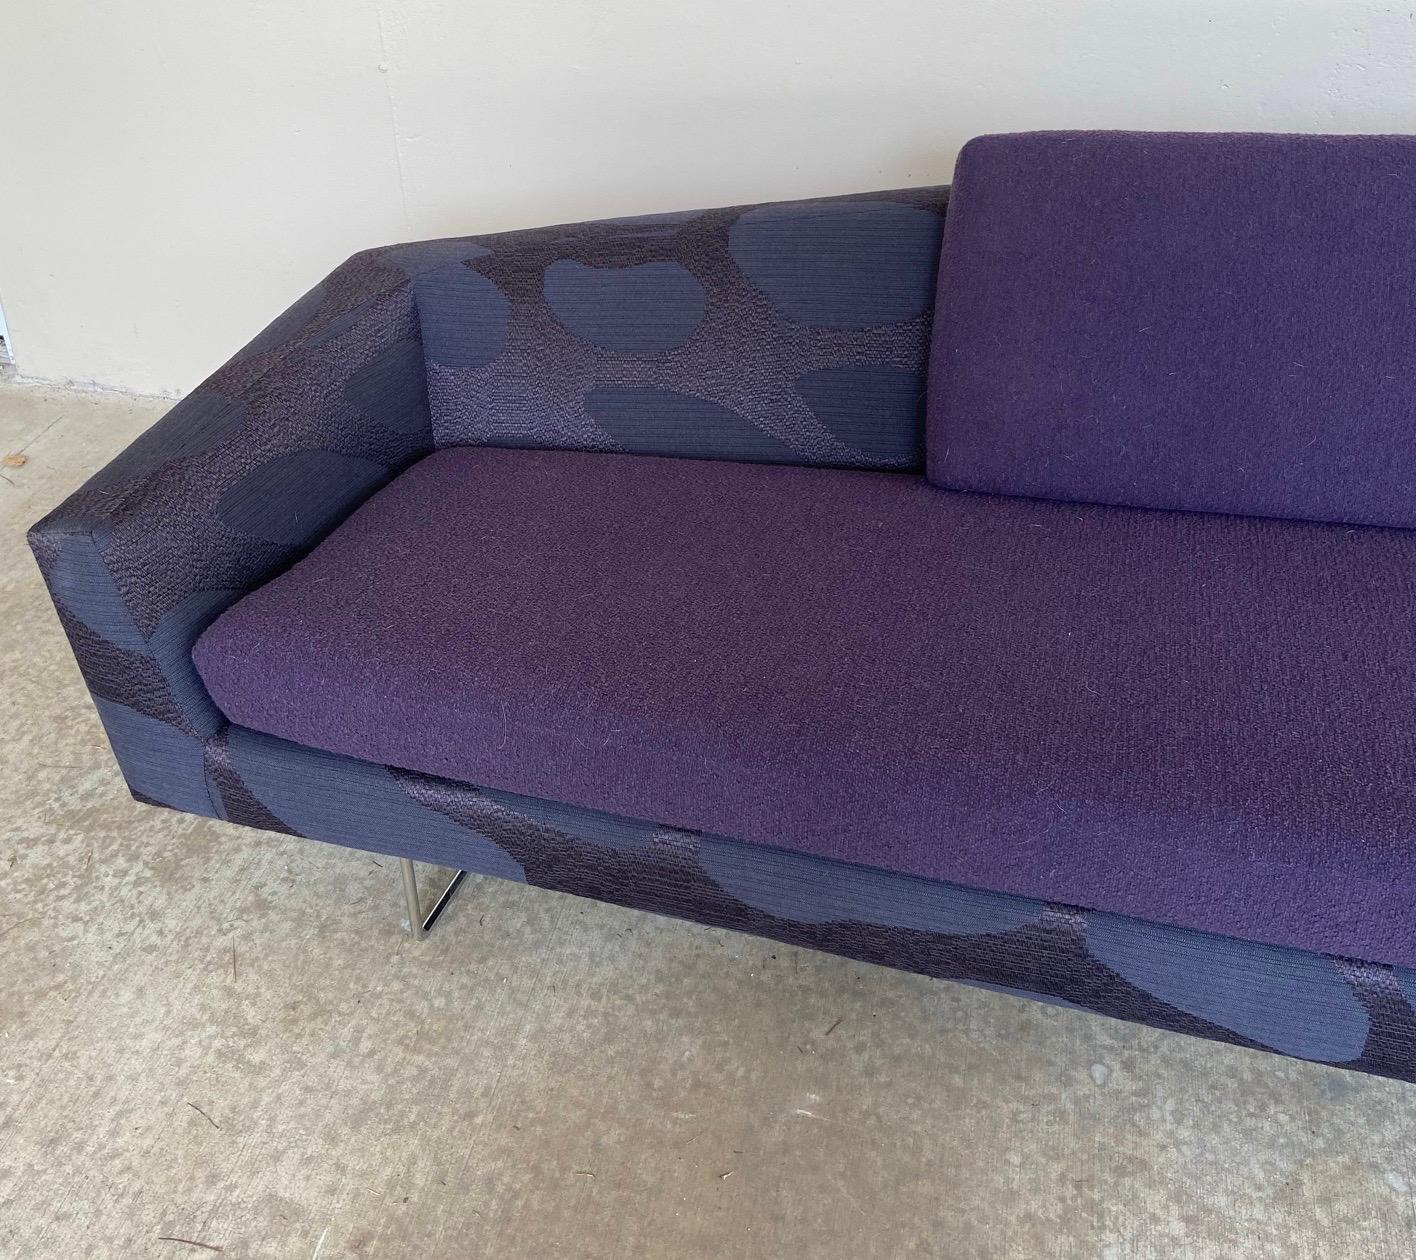 A unique sofa design by David weeks circa 2014… Excellent condition ..beautiful upholstery on a stainless steel base.